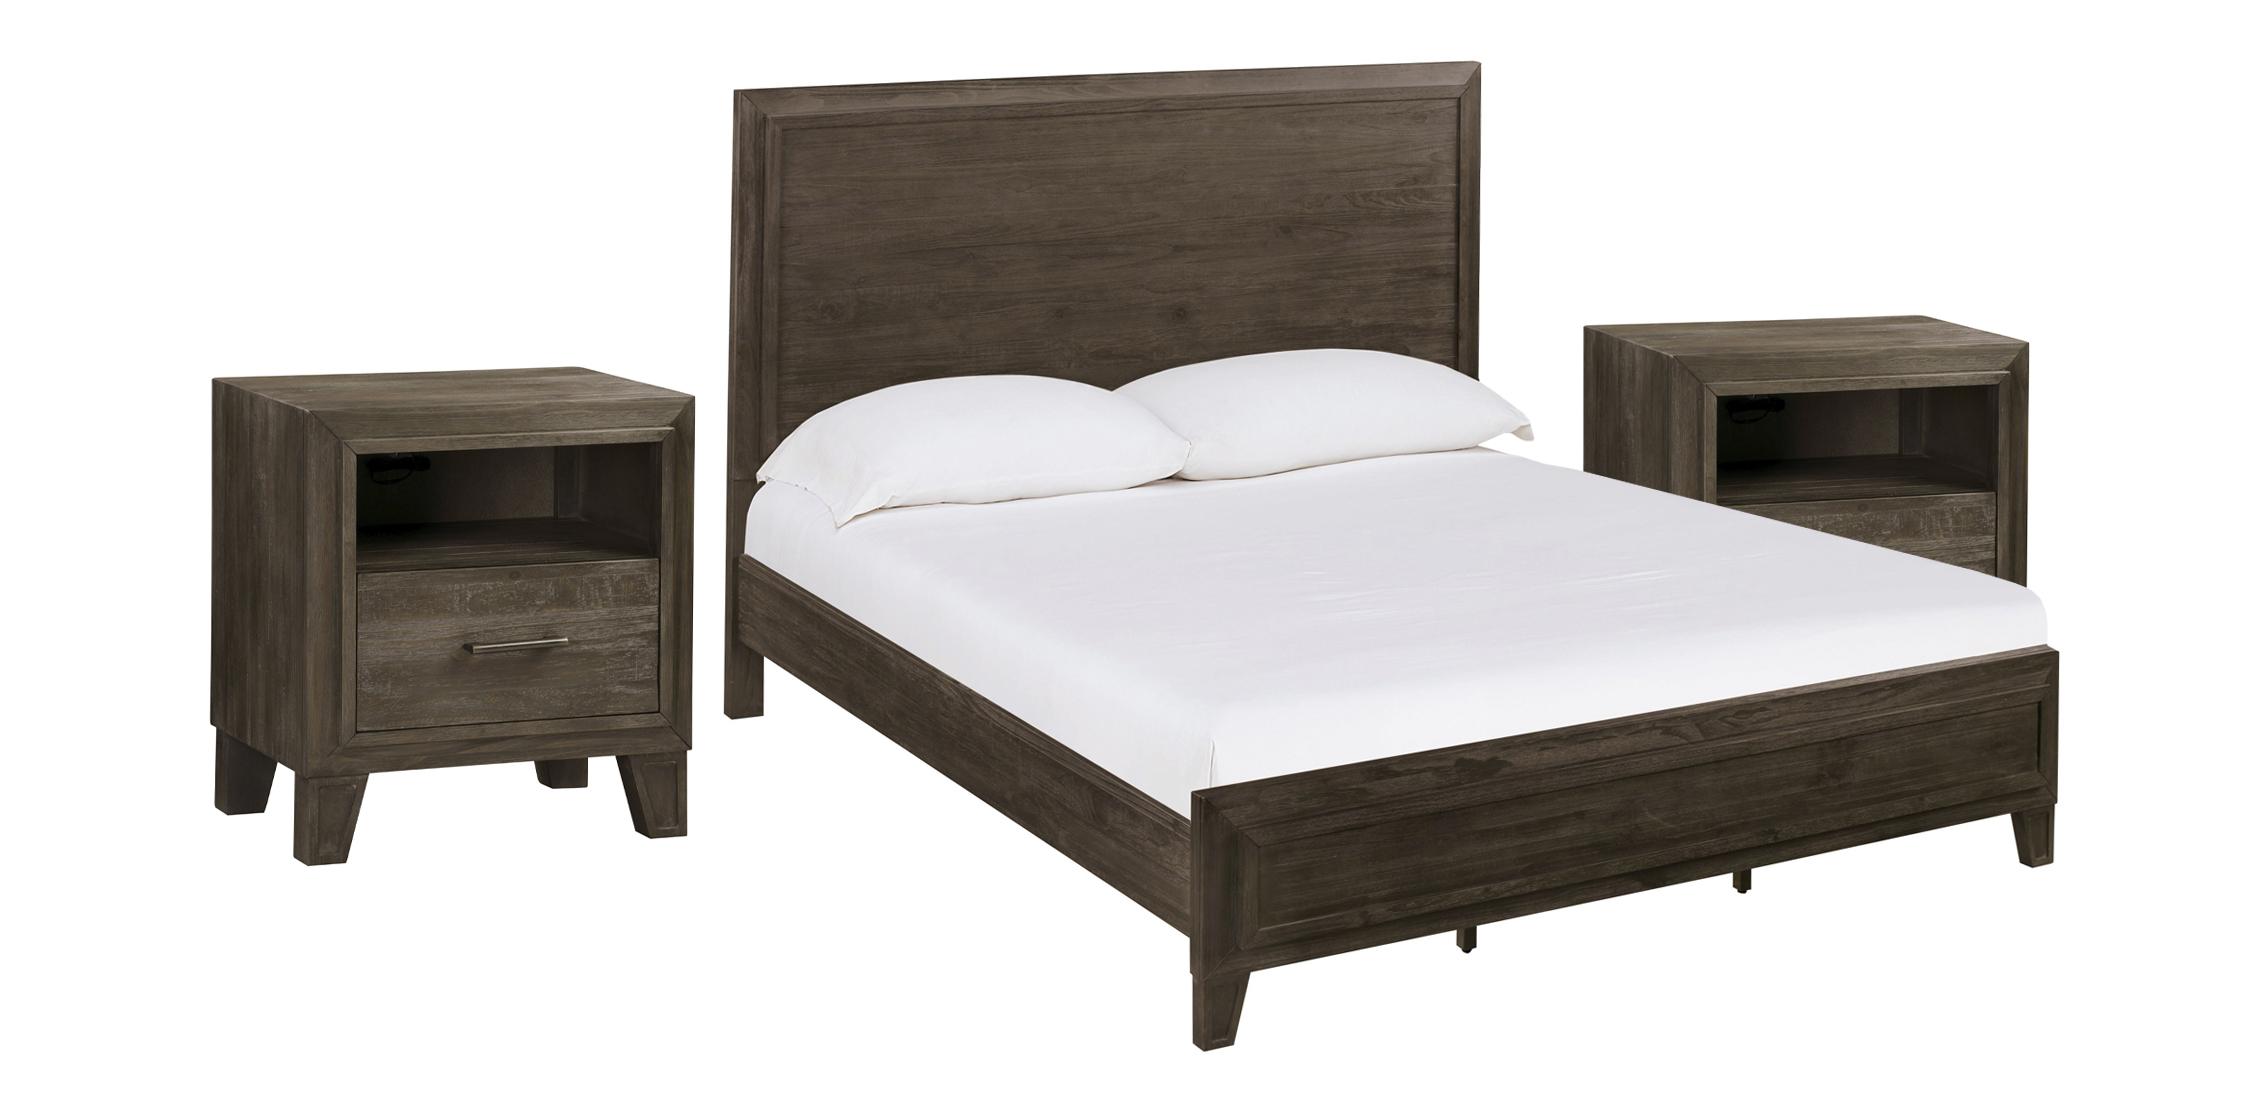 Casual, Rustic Panel Bedroom Set HADLEY A4H6A7-2N-3PC in Onyx 